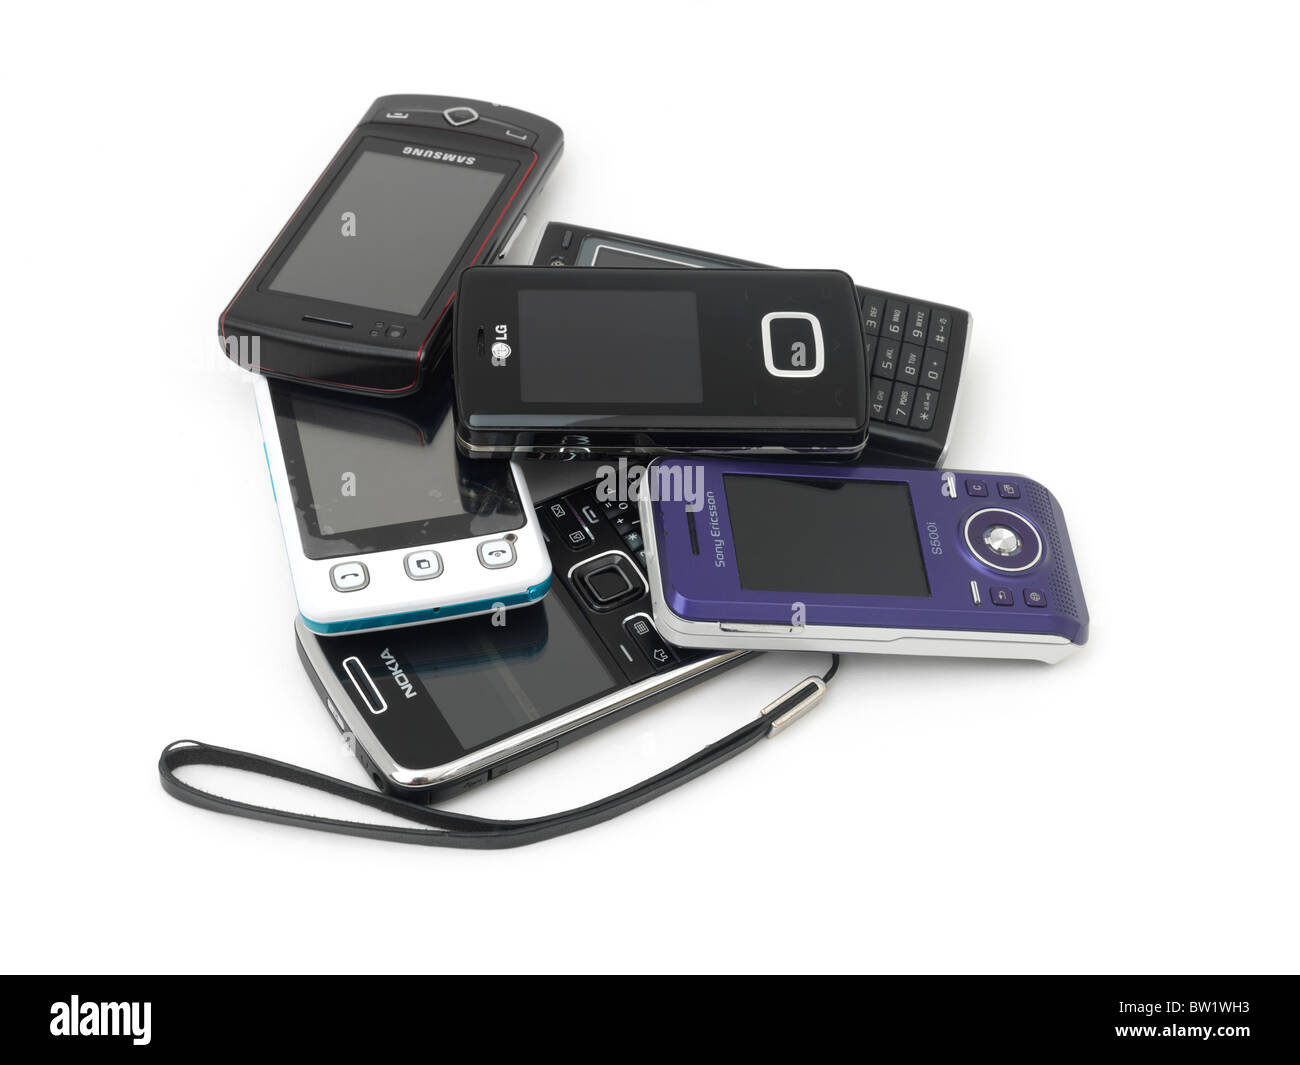 Pile Of Modern Mobile Phones Samsung Tocco, LG Cookie, LG Chocolate, Nokia, Motorola And Sony Ericsson Stock Photo